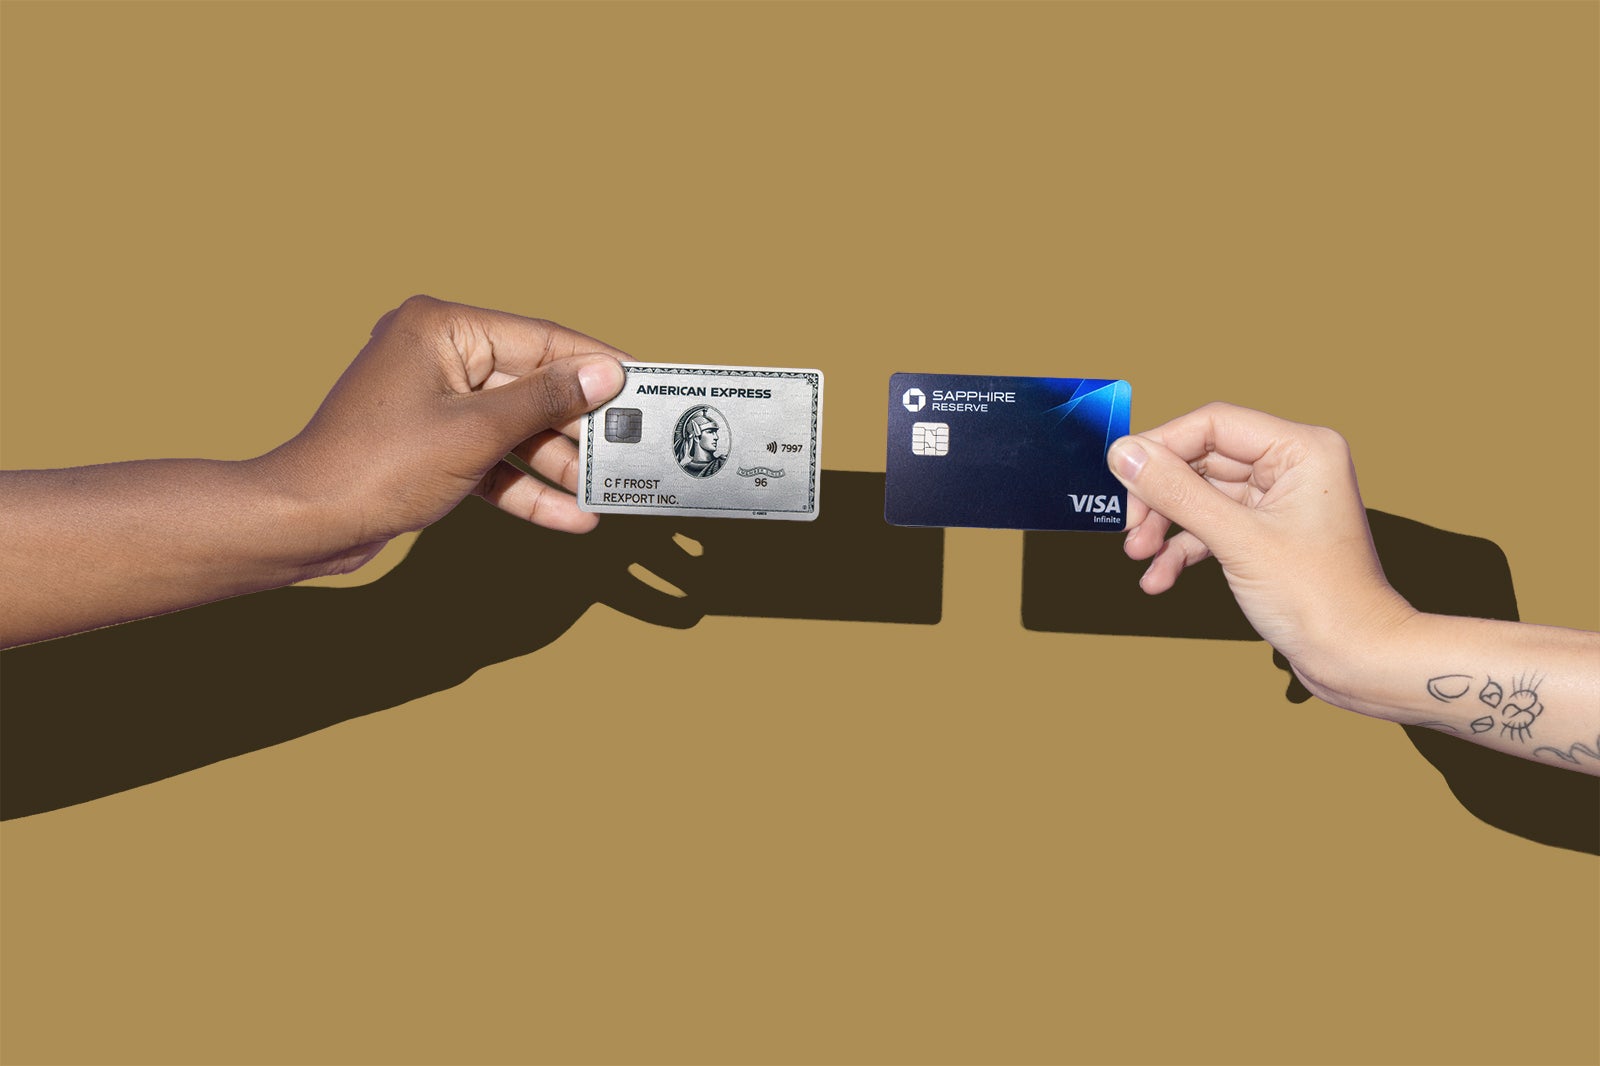 american express travel card vs chase sapphire